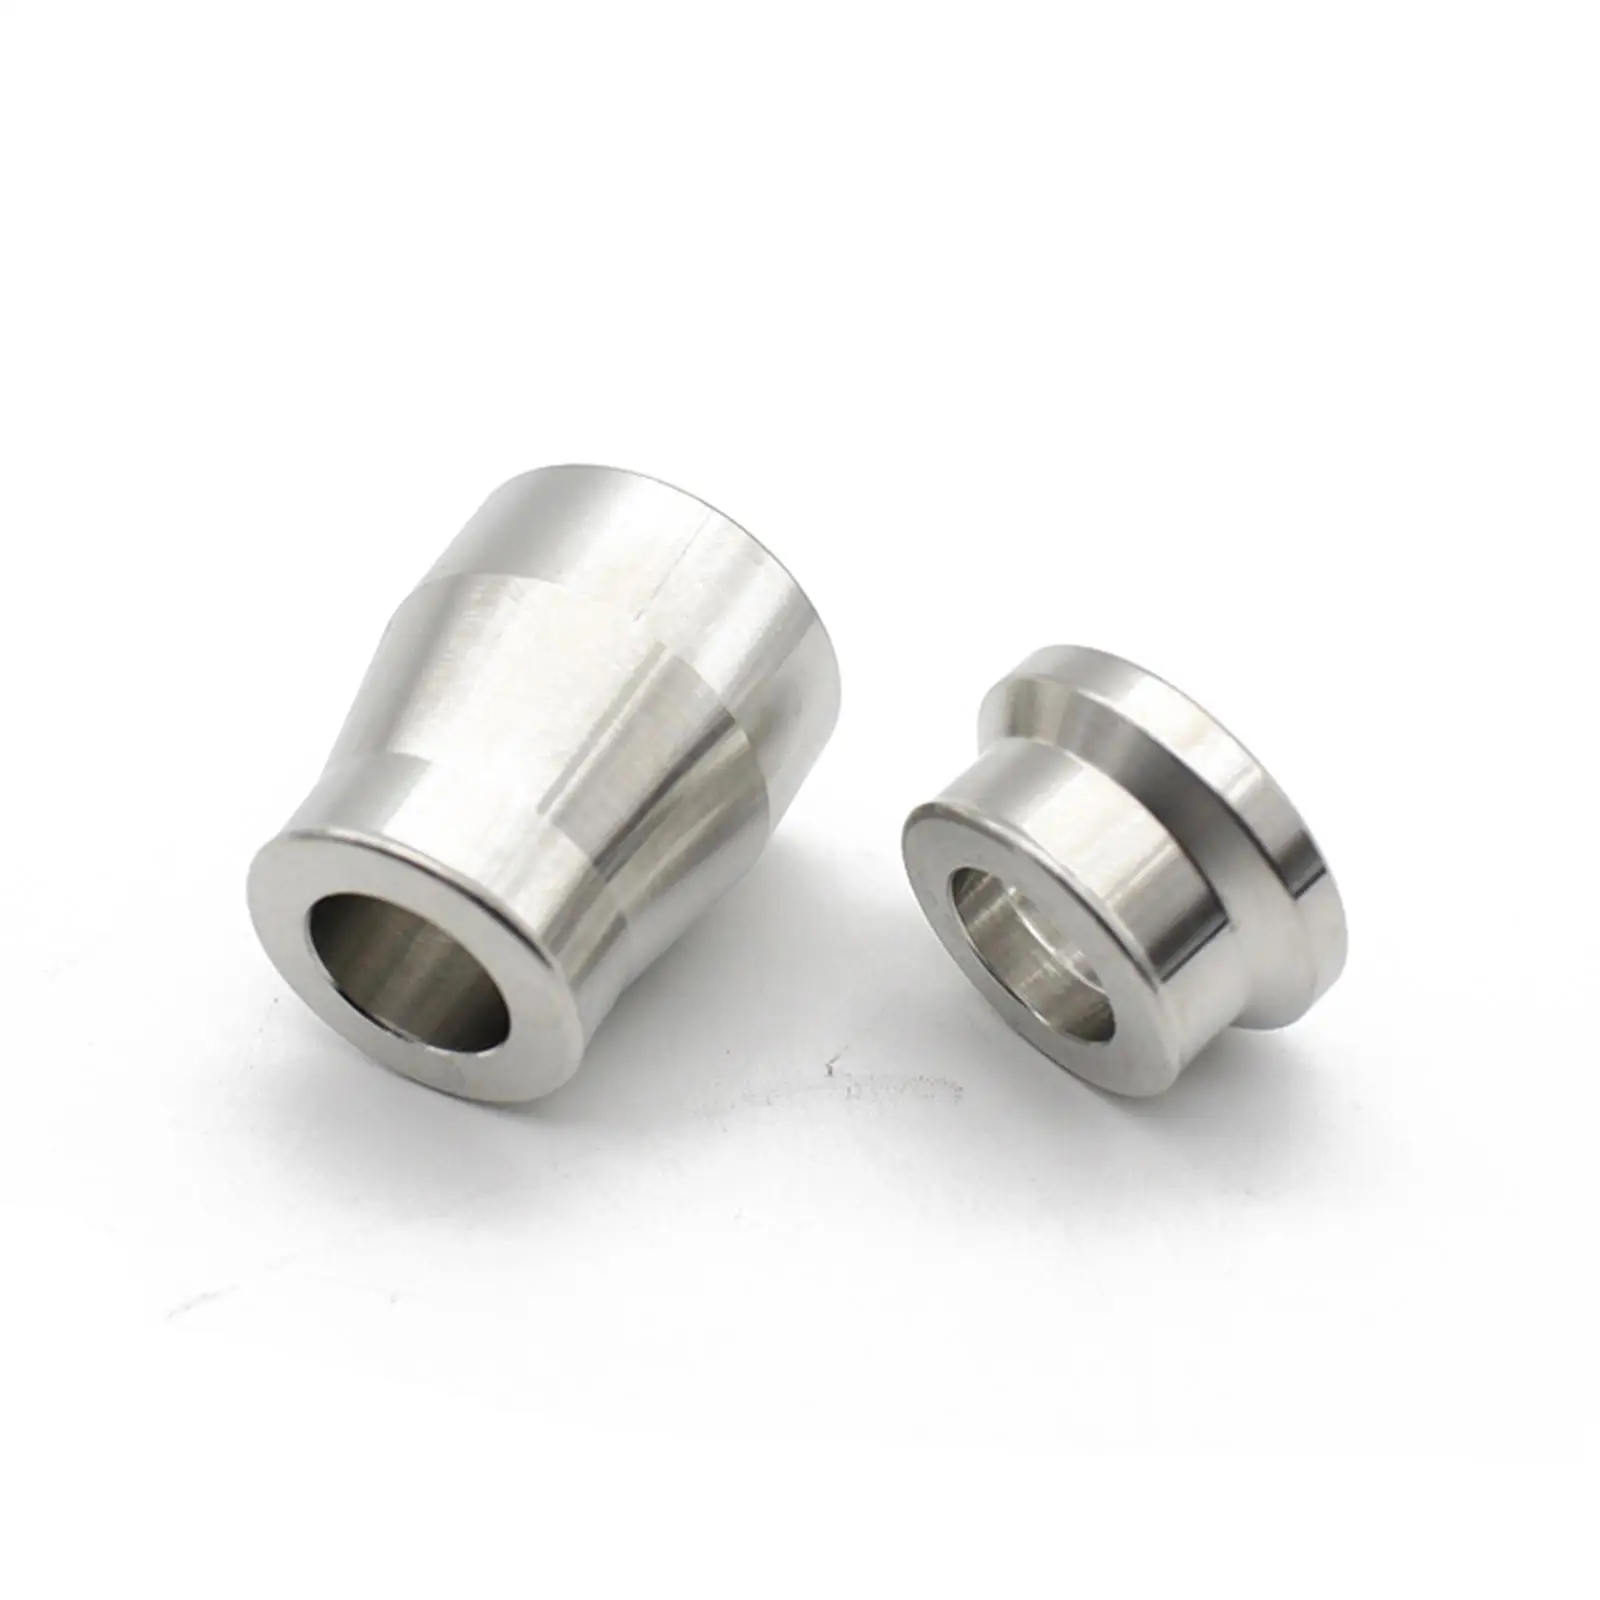 Modified Front Wheel Bushings Replaces Aluminium for Kymco Krv180